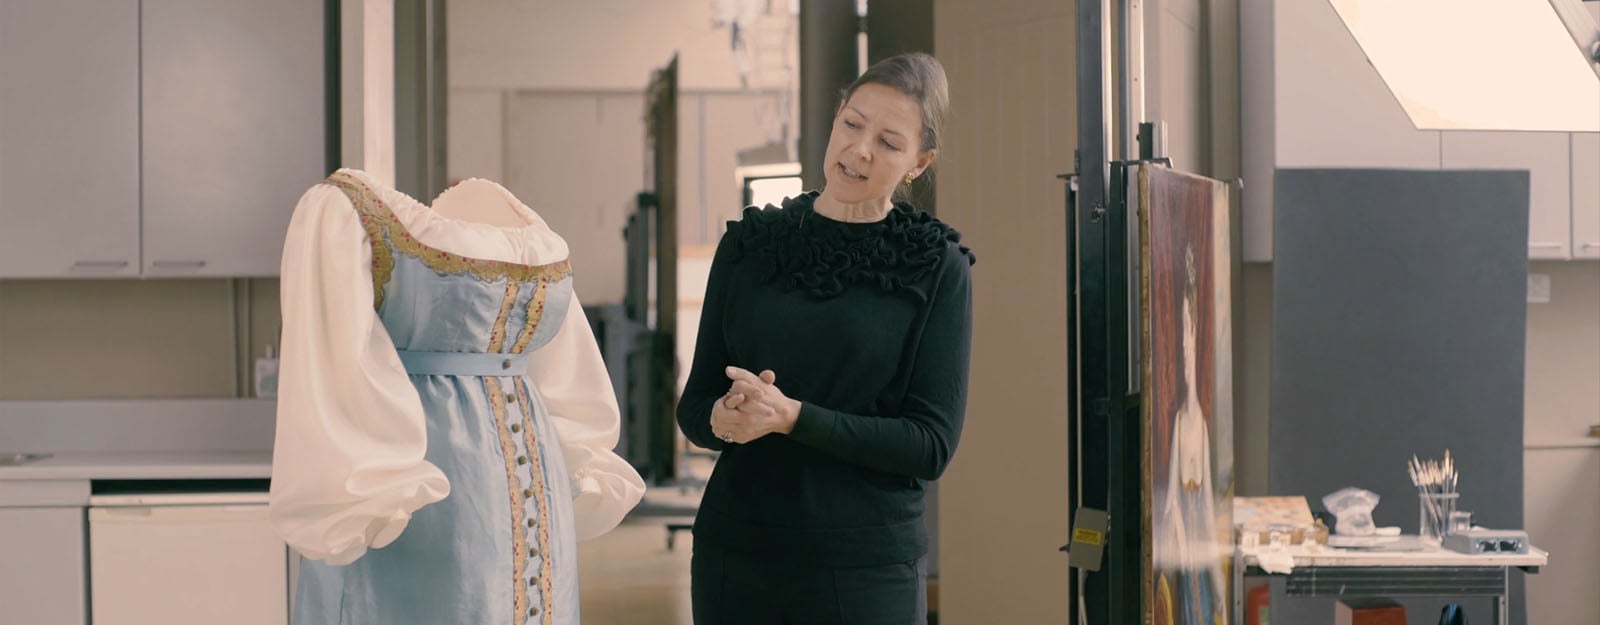 Conservators work on the dress and the portrait of Princess Charlotte in which she is wearing it